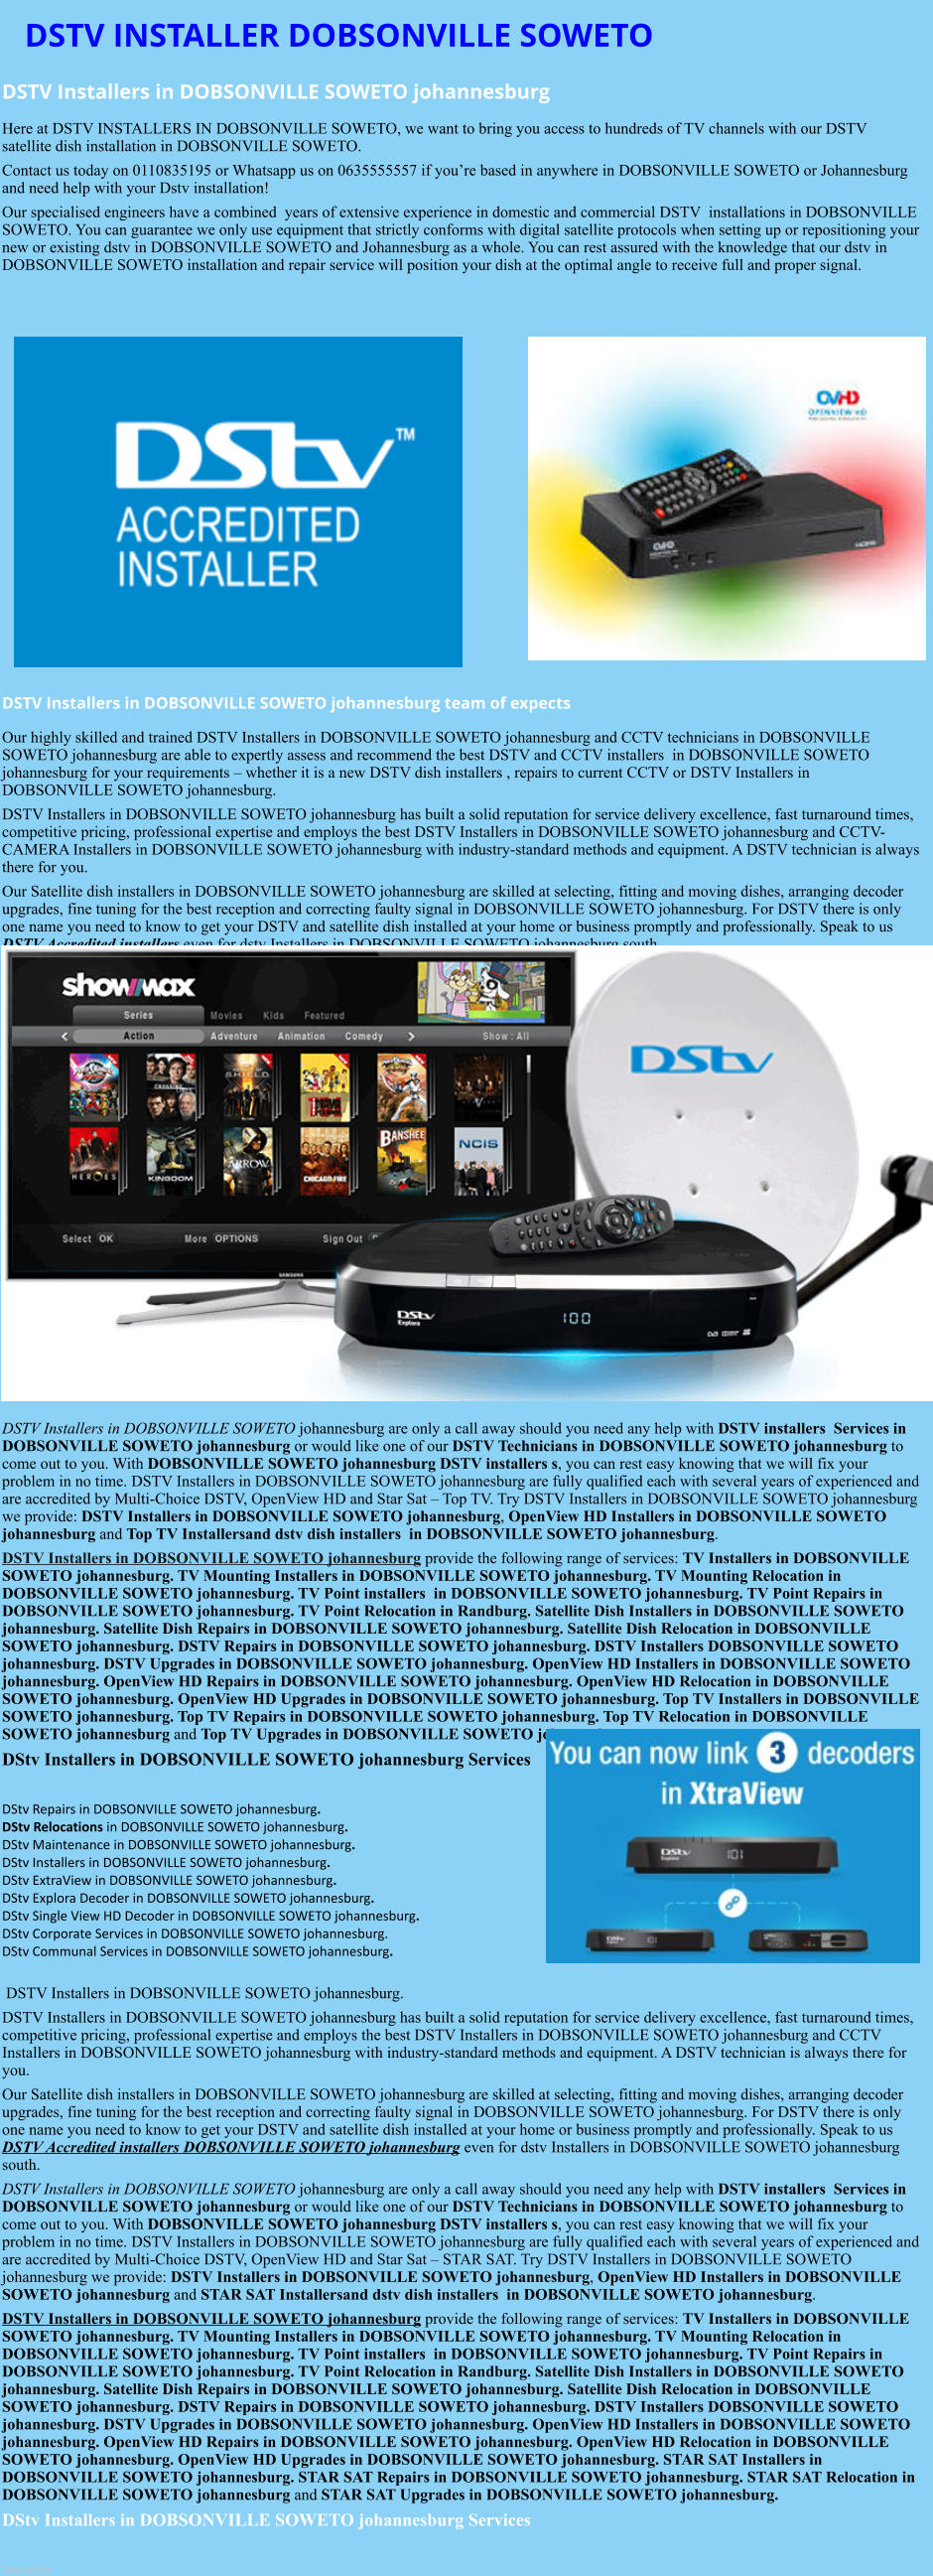 DSTV INSTALLER DOBSONVILLE SOWETO DSTV Installers in DOBSONVILLE SOWETO johannesburg  Here at DSTV INSTALLERS IN DOBSONVILLE SOWETO, we want to bring you access to hundreds of TV channels with our DSTV satellite dish installation in DOBSONVILLE SOWETO. Contact us today on 0110835195 or Whatsapp us on 0635555557 if you’re based in anywhere in DOBSONVILLE SOWETO or Johannesburg and need help with your Dstv installation! Our specialised engineers have a combined  years of extensive experience in domestic and commercial DSTV  installations in DOBSONVILLE SOWETO. You can guarantee we only use equipment that strictly conforms with digital satellite protocols when setting up or repositioning your new or existing dstv in DOBSONVILLE SOWETO and Johannesburg as a whole. You can rest assured with the knowledge that our dstv in DOBSONVILLE SOWETO installation and repair service will position your dish at the optimal angle to receive full and proper signal.                  DSTV Installers in DOBSONVILLE SOWETO johannesburg team of expects Our highly skilled and trained DSTV Installers in DOBSONVILLE SOWETO johannesburg and CCTV technicians in DOBSONVILLE SOWETO johannesburg are able to expertly assess and recommend the best DSTV and CCTV installers  in DOBSONVILLE SOWETO johannesburg for your requirements – whether it is a new DSTV dish installers , repairs to current CCTV or DSTV Installers in DOBSONVILLE SOWETO johannesburg. DSTV Installers in DOBSONVILLE SOWETO johannesburg has built a solid reputation for service delivery excellence, fast turnaround times, competitive pricing, professional expertise and employs the best DSTV Installers in DOBSONVILLE SOWETO johannesburg and CCTV-CAMERA Installers in DOBSONVILLE SOWETO johannesburg with industry-standard methods and equipment. A DSTV technician is always there for you. Our Satellite dish installers in DOBSONVILLE SOWETO johannesburg are skilled at selecting, fitting and moving dishes, arranging decoder upgrades, fine tuning for the best reception and correcting faulty signal in DOBSONVILLE SOWETO johannesburg. For DSTV there is only one name you need to know to get your DSTV and satellite dish installed at your home or business promptly and professionally. Speak to us DSTV Accredited installers even for dstv Installers in DOBSONVILLE SOWETO johannesburg south.                    DSTV Installers in DOBSONVILLE SOWETO johannesburg are only a call away should you need any help with DSTV installers  Services in DOBSONVILLE SOWETO johannesburg or would like one of our DSTV Technicians in DOBSONVILLE SOWETO johannesburg to come out to you. With DOBSONVILLE SOWETO johannesburg DSTV installers s, you can rest easy knowing that we will fix your problem in no time. DSTV Installers in DOBSONVILLE SOWETO johannesburg are fully qualified each with several years of experienced and are accredited by Multi-Choice DSTV, OpenView HD and Star Sat – Top TV. Try DSTV Installers in DOBSONVILLE SOWETO johannesburg we provide: DSTV Installers in DOBSONVILLE SOWETO johannesburg, OpenView HD Installers in DOBSONVILLE SOWETO johannesburg and Top TV Installersand dstv dish installers  in DOBSONVILLE SOWETO johannesburg. DSTV Installers in DOBSONVILLE SOWETO johannesburg provide the following range of services: TV Installers in DOBSONVILLE SOWETO johannesburg. TV Mounting Installers in DOBSONVILLE SOWETO johannesburg. TV Mounting Relocation in DOBSONVILLE SOWETO johannesburg. TV Point installers  in DOBSONVILLE SOWETO johannesburg. TV Point Repairs in DOBSONVILLE SOWETO johannesburg. TV Point Relocation in Randburg. Satellite Dish Installers in DOBSONVILLE SOWETO johannesburg. Satellite Dish Repairs in DOBSONVILLE SOWETO johannesburg. Satellite Dish Relocation in DOBSONVILLE SOWETO johannesburg. DSTV Repairs in DOBSONVILLE SOWETO johannesburg. DSTV Installers DOBSONVILLE SOWETO johannesburg. DSTV Upgrades in DOBSONVILLE SOWETO johannesburg. OpenView HD Installers in DOBSONVILLE SOWETO johannesburg. OpenView HD Repairs in DOBSONVILLE SOWETO johannesburg. OpenView HD Relocation in DOBSONVILLE SOWETO johannesburg. OpenView HD Upgrades in DOBSONVILLE SOWETO johannesburg. Top TV Installers in DOBSONVILLE SOWETO johannesburg. Top TV Repairs in DOBSONVILLE SOWETO johannesburg. Top TV Relocation in DOBSONVILLE SOWETO johannesburg and Top TV Upgrades in DOBSONVILLE SOWETO johannesburg. DStv Installers in DOBSONVILLE SOWETO johannesburg Services  DStv Repairs in DOBSONVILLE SOWETO johannesburg.  DStv Relocations in DOBSONVILLE SOWETO johannesburg.  DStv Maintenance in DOBSONVILLE SOWETO johannesburg. DStv Installers in DOBSONVILLE SOWETO johannesburg. DStv ExtraView in DOBSONVILLE SOWETO johannesburg. DStv Explora Decoder in DOBSONVILLE SOWETO johannesburg. DStv Single View HD Decoder in DOBSONVILLE SOWETO johannesburg. DStv Corporate Services in DOBSONVILLE SOWETO johannesburg. DStv Communal Services in DOBSONVILLE SOWETO johannesburg.   DSTV Installers in DOBSONVILLE SOWETO johannesburg. DSTV Installers in DOBSONVILLE SOWETO johannesburg has built a solid reputation for service delivery excellence, fast turnaround times, competitive pricing, professional expertise and employs the best DSTV Installers in DOBSONVILLE SOWETO johannesburg and CCTV Installers in DOBSONVILLE SOWETO johannesburg with industry-standard methods and equipment. A DSTV technician is always there for you. Our Satellite dish installers in DOBSONVILLE SOWETO johannesburg are skilled at selecting, fitting and moving dishes, arranging decoder upgrades, fine tuning for the best reception and correcting faulty signal in DOBSONVILLE SOWETO johannesburg. For DSTV there is only one name you need to know to get your DSTV and satellite dish installed at your home or business promptly and professionally. Speak to us DSTV Accredited installers DOBSONVILLE SOWETO johannesburg even for dstv Installers in DOBSONVILLE SOWETO johannesburg south. DSTV Installers in DOBSONVILLE SOWETO johannesburg are only a call away should you need any help with DSTV installers  Services in DOBSONVILLE SOWETO johannesburg or would like one of our DSTV Technicians in DOBSONVILLE SOWETO johannesburg to come out to you. With DOBSONVILLE SOWETO johannesburg DSTV installers s, you can rest easy knowing that we will fix your problem in no time. DSTV Installers in DOBSONVILLE SOWETO johannesburg are fully qualified each with several years of experienced and are accredited by Multi-Choice DSTV, OpenView HD and Star Sat – STAR SAT. Try DSTV Installers in DOBSONVILLE SOWETO johannesburg we provide: DSTV Installers in DOBSONVILLE SOWETO johannesburg, OpenView HD Installers in DOBSONVILLE SOWETO johannesburg and STAR SAT Installersand dstv dish installers  in DOBSONVILLE SOWETO johannesburg. DSTV Installers in DOBSONVILLE SOWETO johannesburg provide the following range of services: TV Installers in DOBSONVILLE SOWETO johannesburg. TV Mounting Installers in DOBSONVILLE SOWETO johannesburg. TV Mounting Relocation in DOBSONVILLE SOWETO johannesburg. TV Point installers  in DOBSONVILLE SOWETO johannesburg. TV Point Repairs in DOBSONVILLE SOWETO johannesburg. TV Point Relocation in Randburg. Satellite Dish Installers in DOBSONVILLE SOWETO johannesburg. Satellite Dish Repairs in DOBSONVILLE SOWETO johannesburg. Satellite Dish Relocation in DOBSONVILLE SOWETO johannesburg. DSTV Repairs in DOBSONVILLE SOWETO johannesburg. DSTV Installers DOBSONVILLE SOWETO johannesburg. DSTV Upgrades in DOBSONVILLE SOWETO johannesburg. OpenView HD Installers in DOBSONVILLE SOWETO johannesburg. OpenView HD Repairs in DOBSONVILLE SOWETO johannesburg. OpenView HD Relocation in DOBSONVILLE SOWETO johannesburg. OpenView HD Upgrades in DOBSONVILLE SOWETO johannesburg. STAR SAT Installers in DOBSONVILLE SOWETO johannesburg. STAR SAT Repairs in DOBSONVILLE SOWETO johannesburg. STAR SAT Relocation in DOBSONVILLE SOWETO johannesburg and STAR SAT Upgrades in DOBSONVILLE SOWETO johannesburg. DStv Installers in DOBSONVILLE SOWETO johannesburg Services  See also